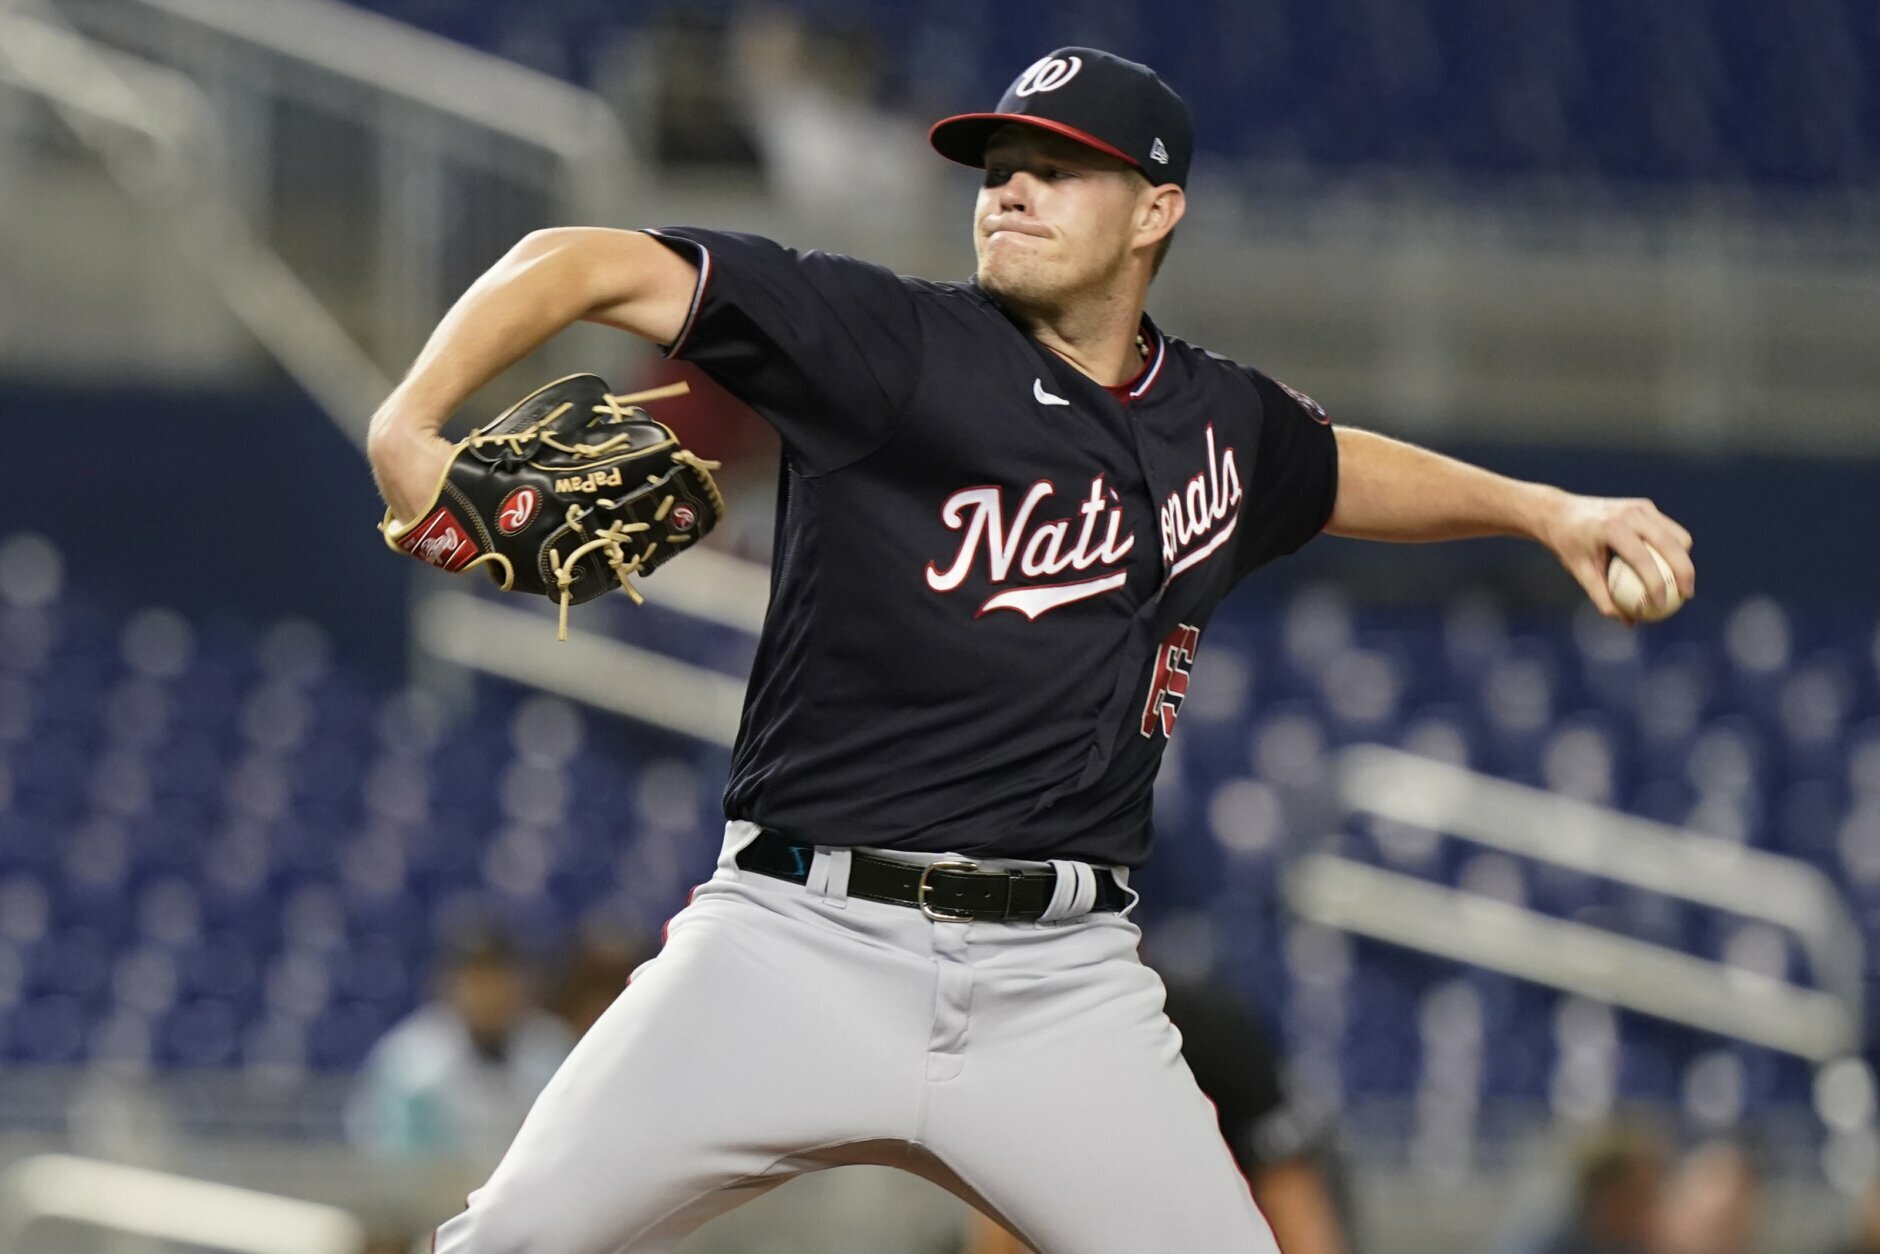 Josh Rogers allows 1 run to lead Nationals over Marlins 7-1 - WTOP